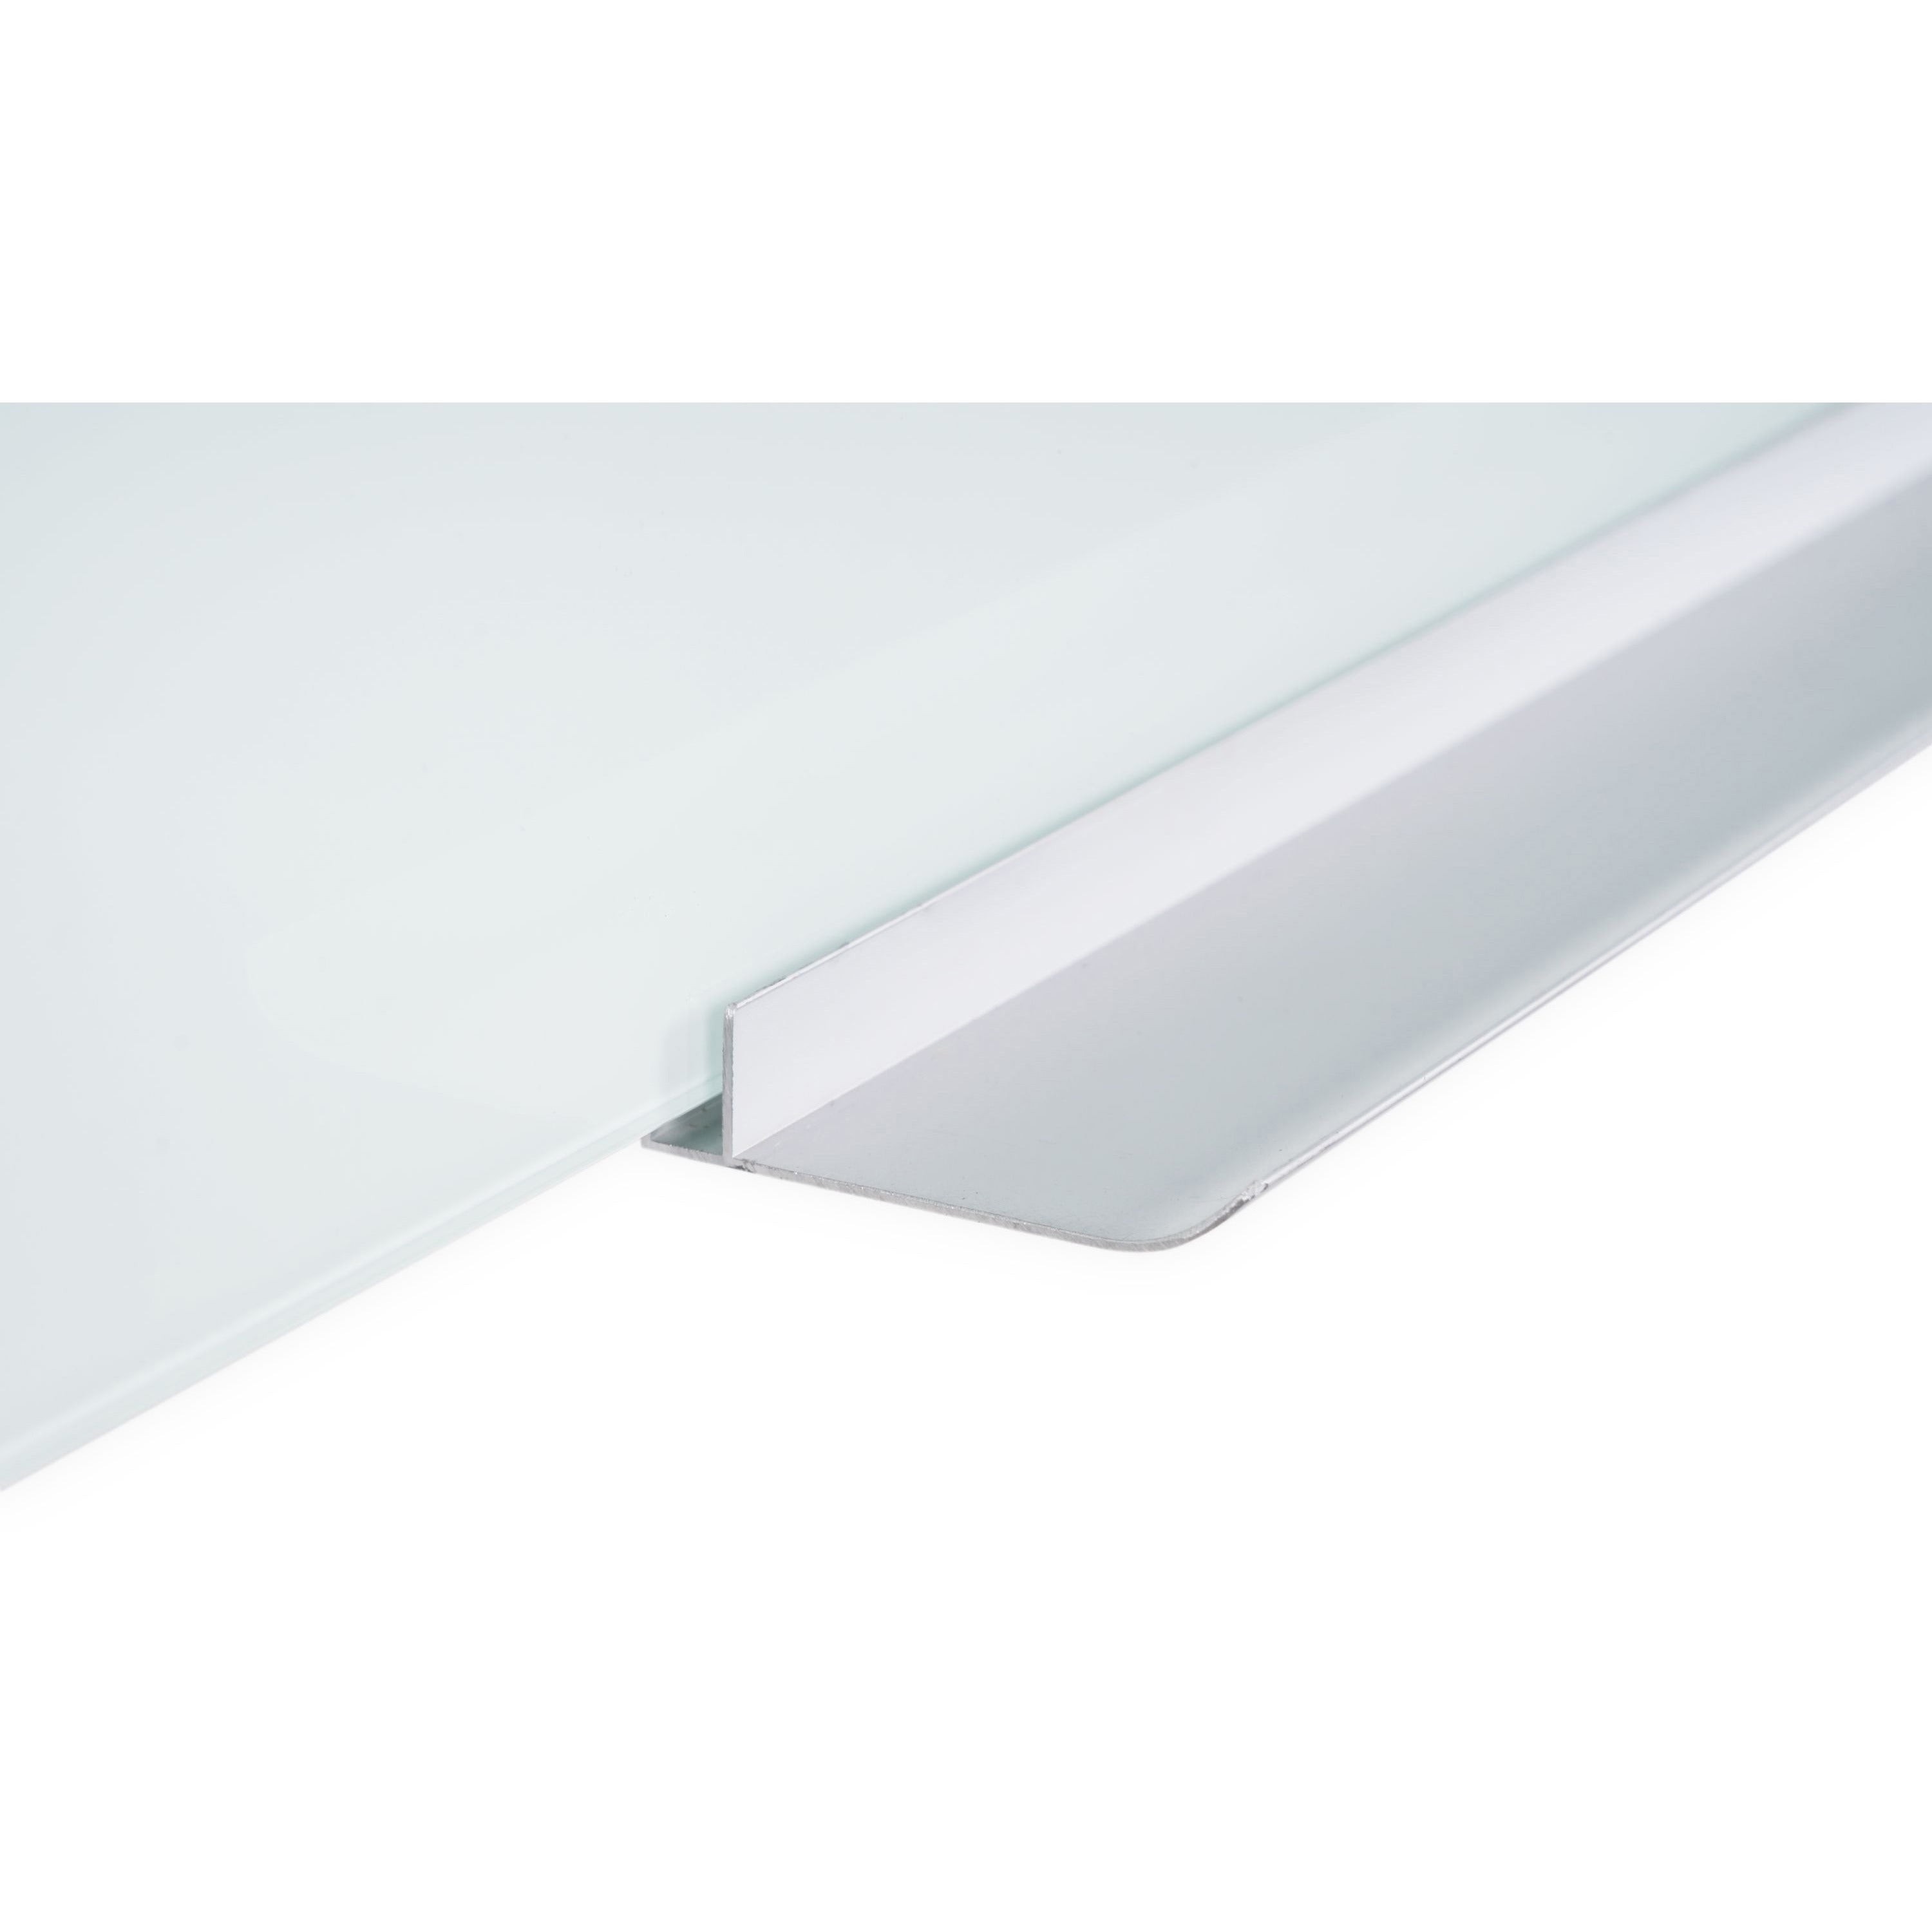 bi-silque-dry-erase-glass-board-24-2-ft-width-x-36-3-ft-height-white-tempered-glass-surface-rectangle-horizontal-vertical-1-each_bvcgl074407 - 2